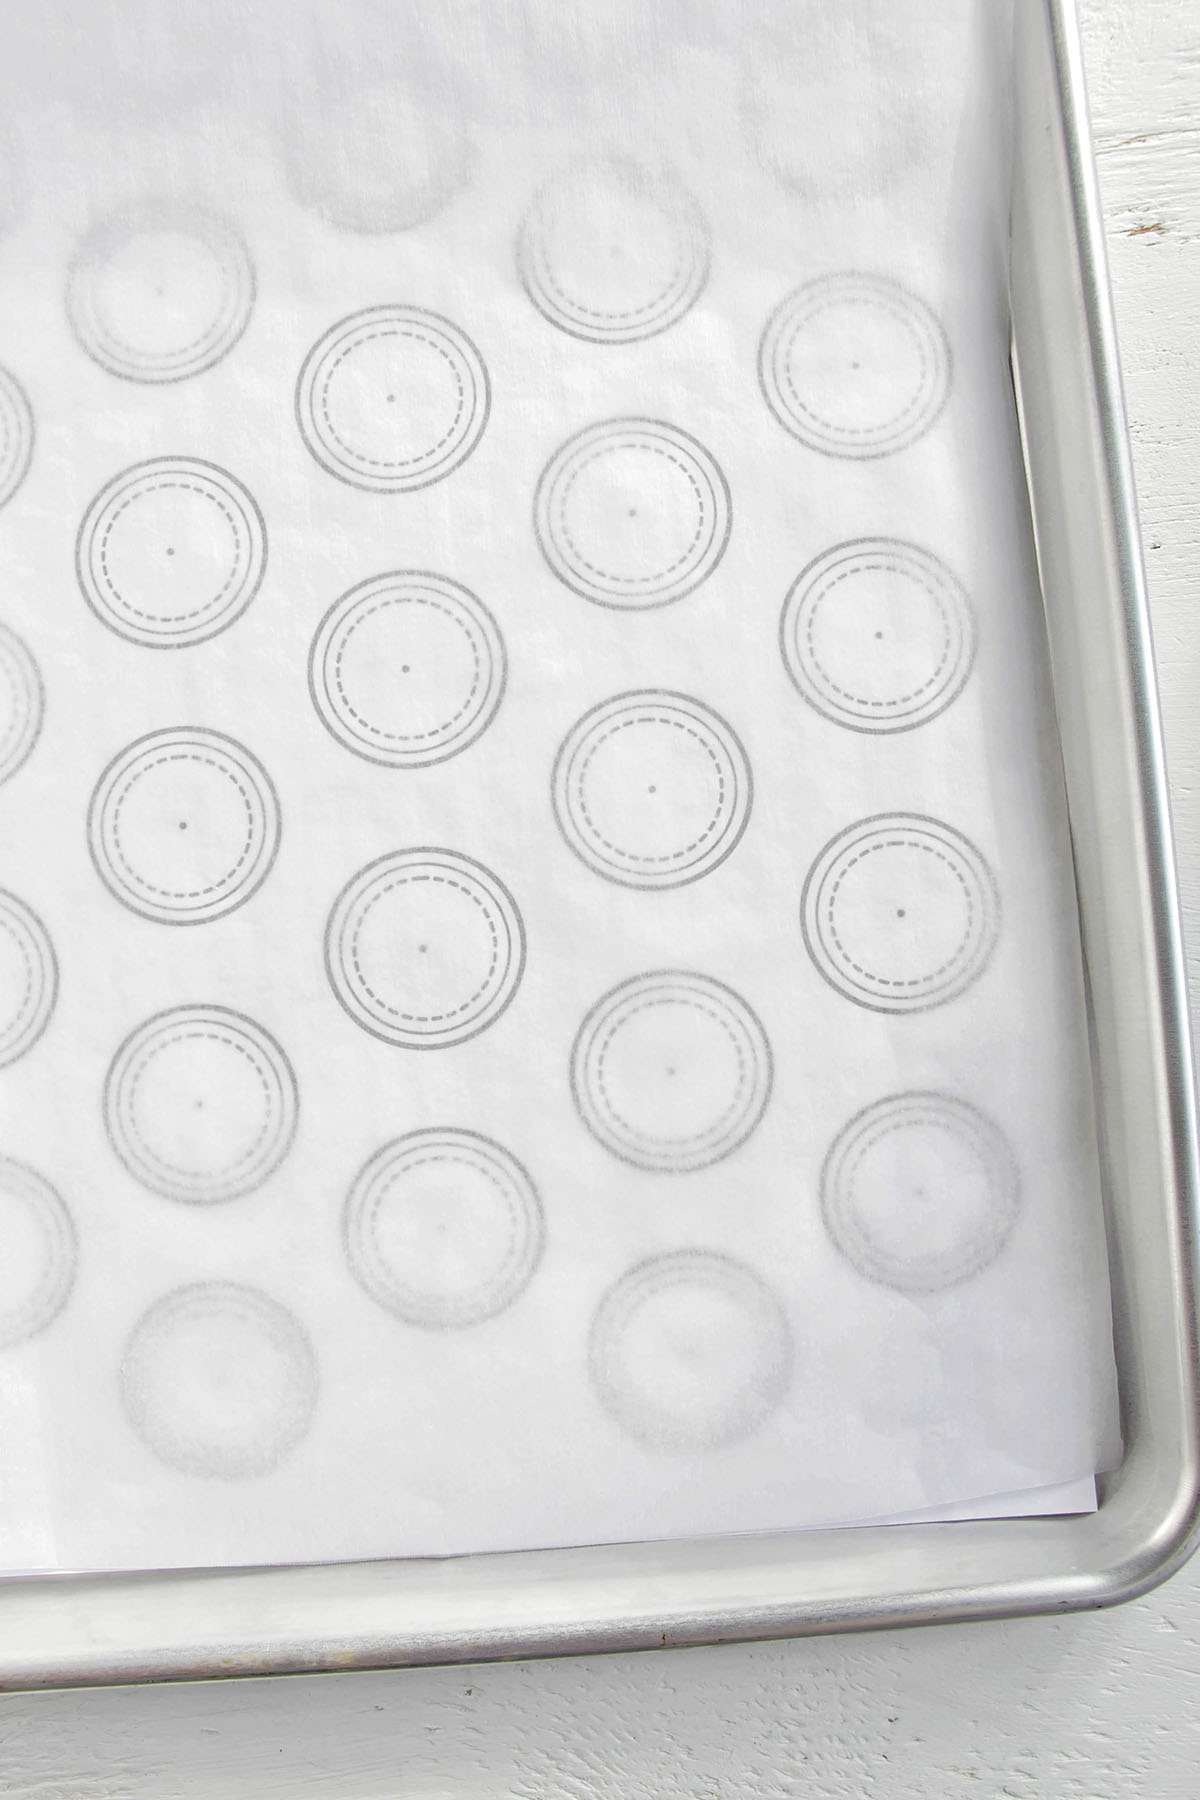 macaron piping guide under a parchment lined baking sheet.